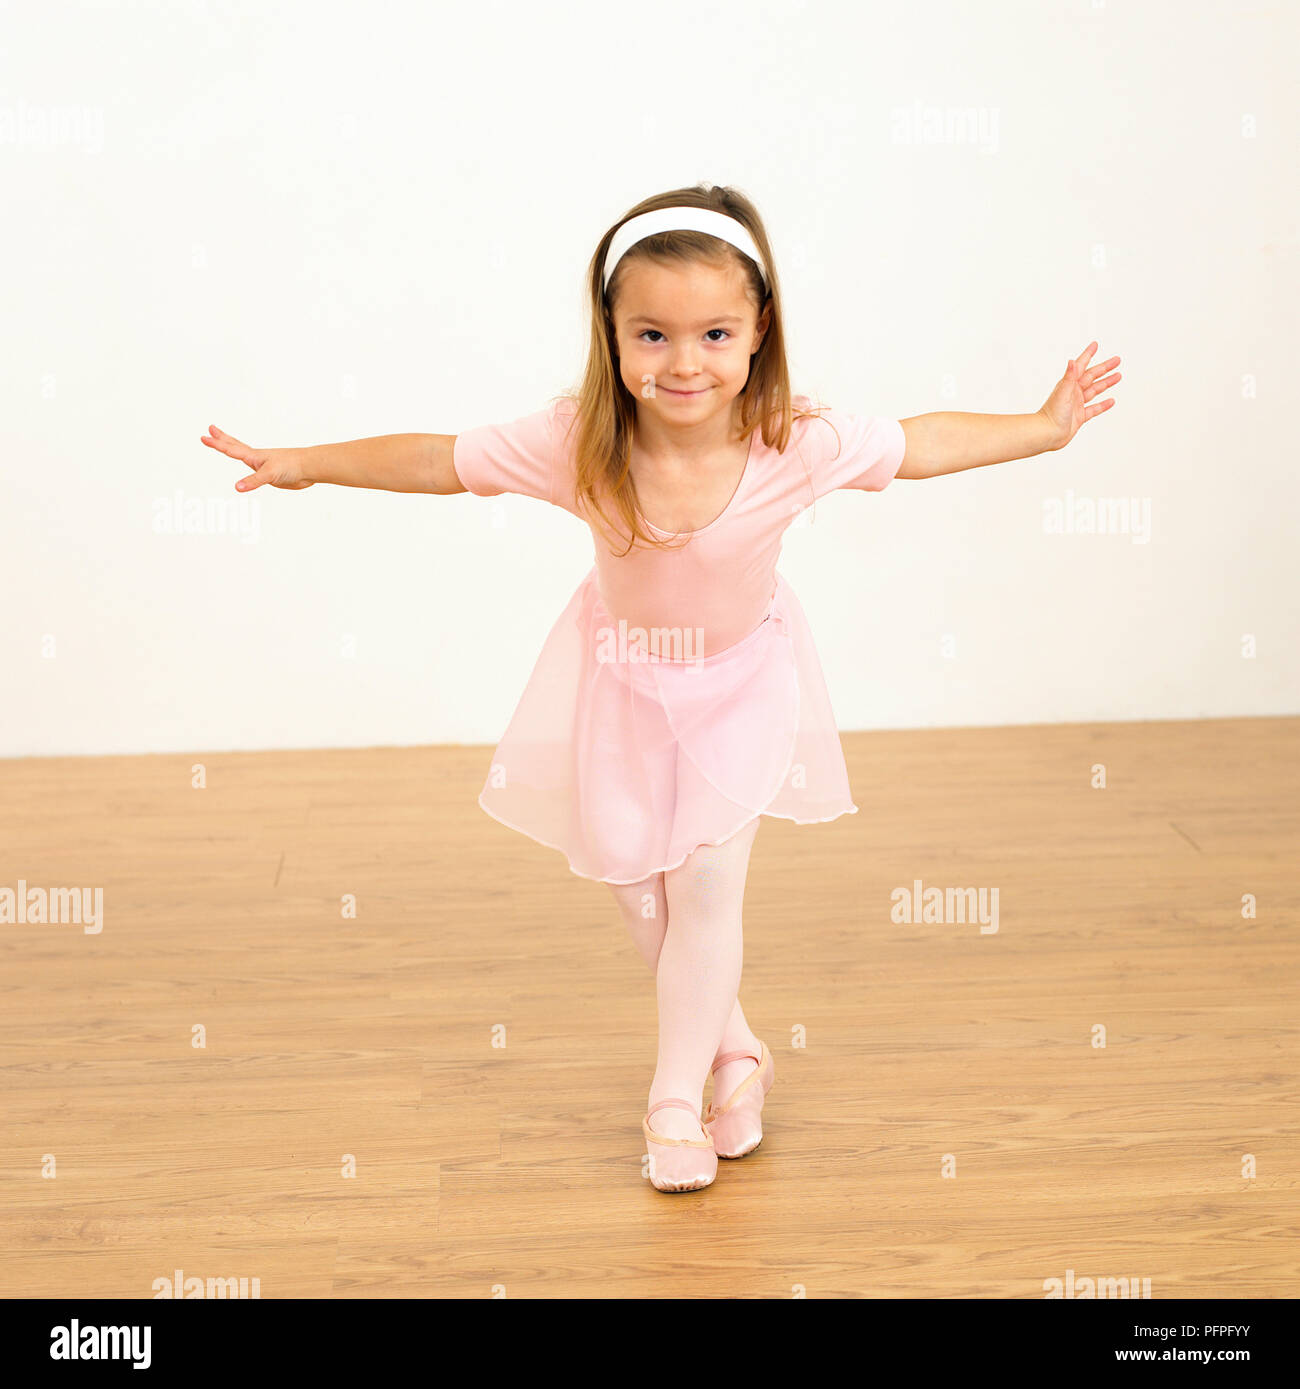 Girl in ballerina outfit with arms outstretched, 5 years old Stock Photo